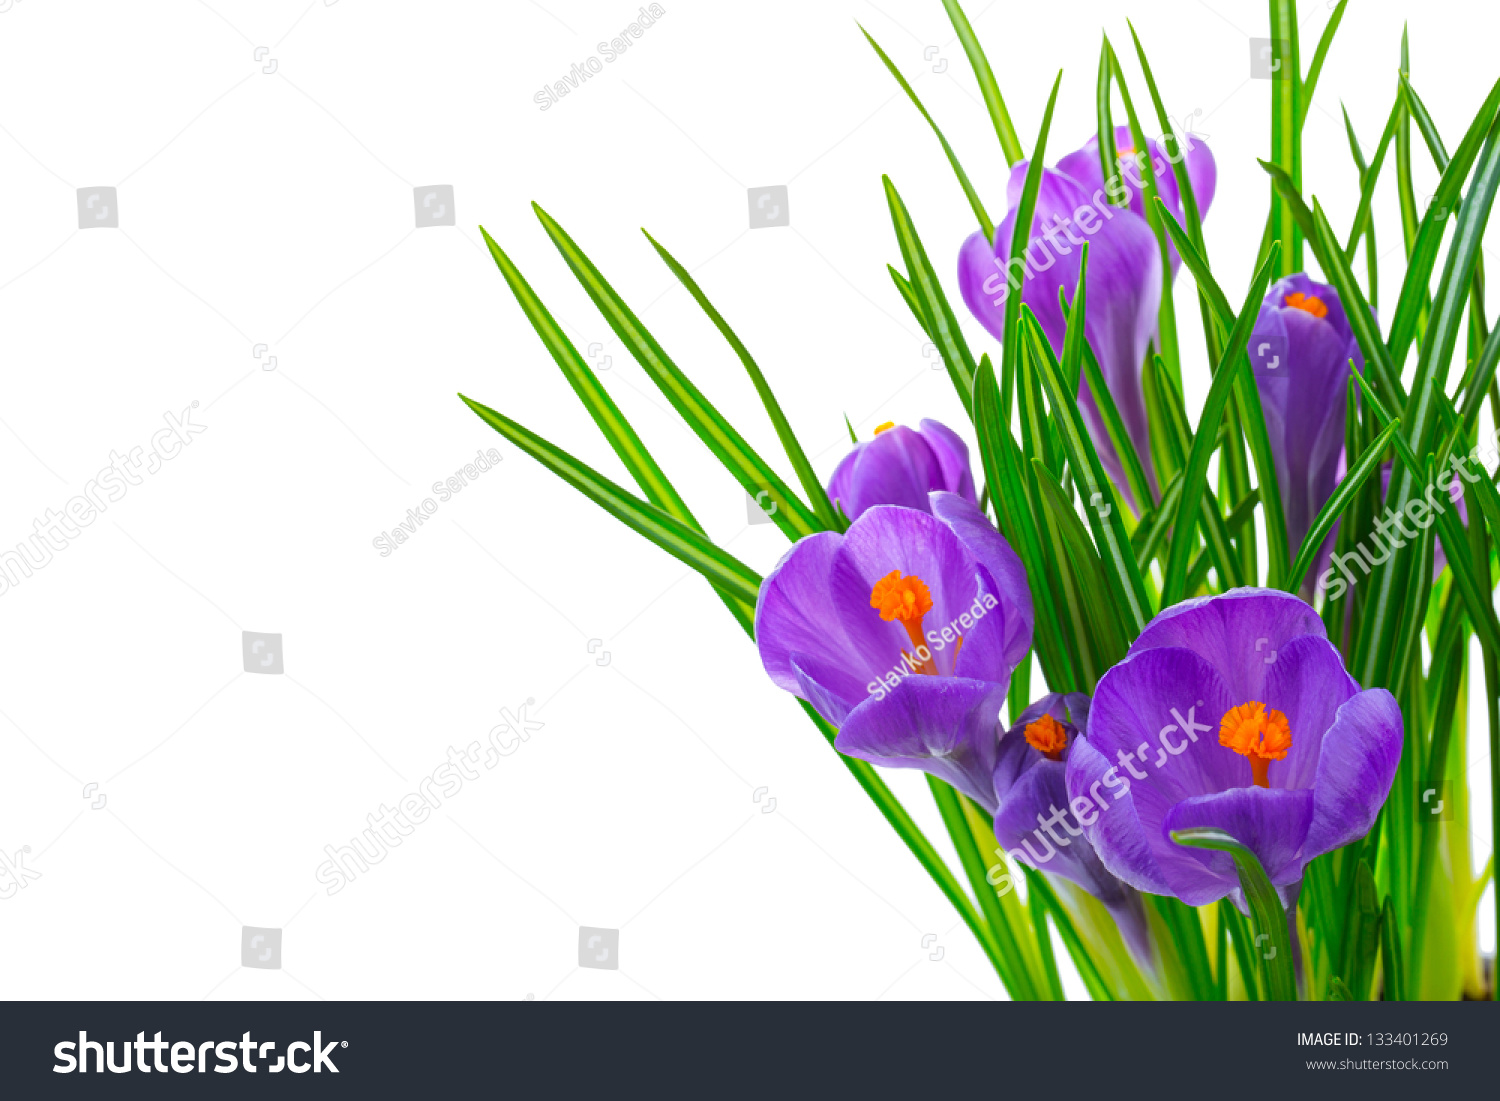 Crocus flowers isolated on white background in macro lens shot. #133401269